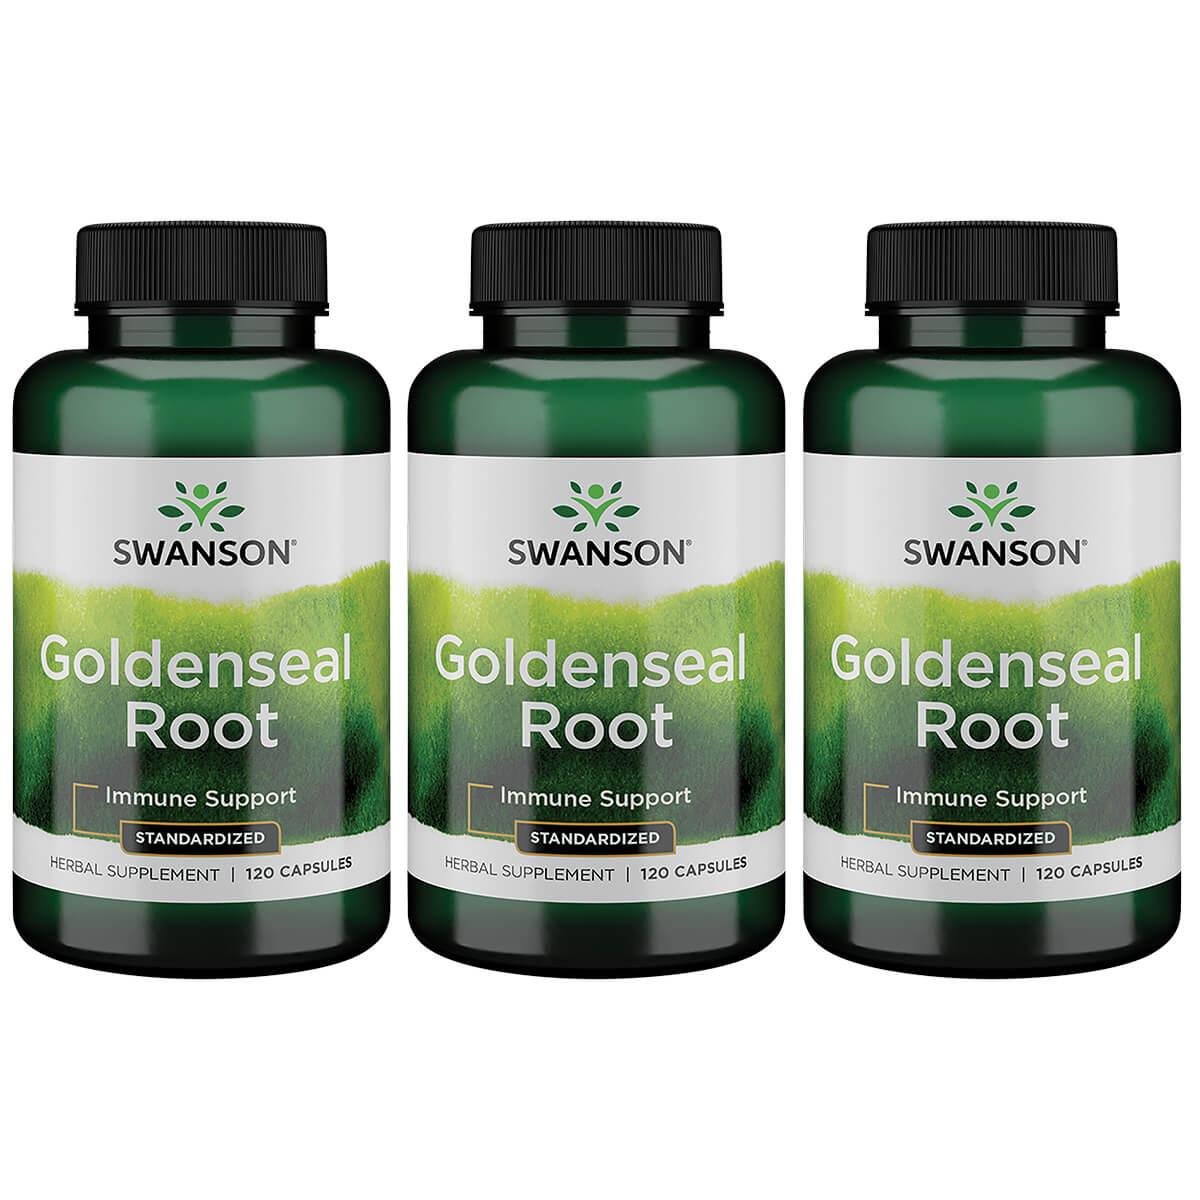 Swanson Superior Herbs Goldenseal Root - Standardized 3 Pack Vitamin 120 Caps Herbs and Supplements